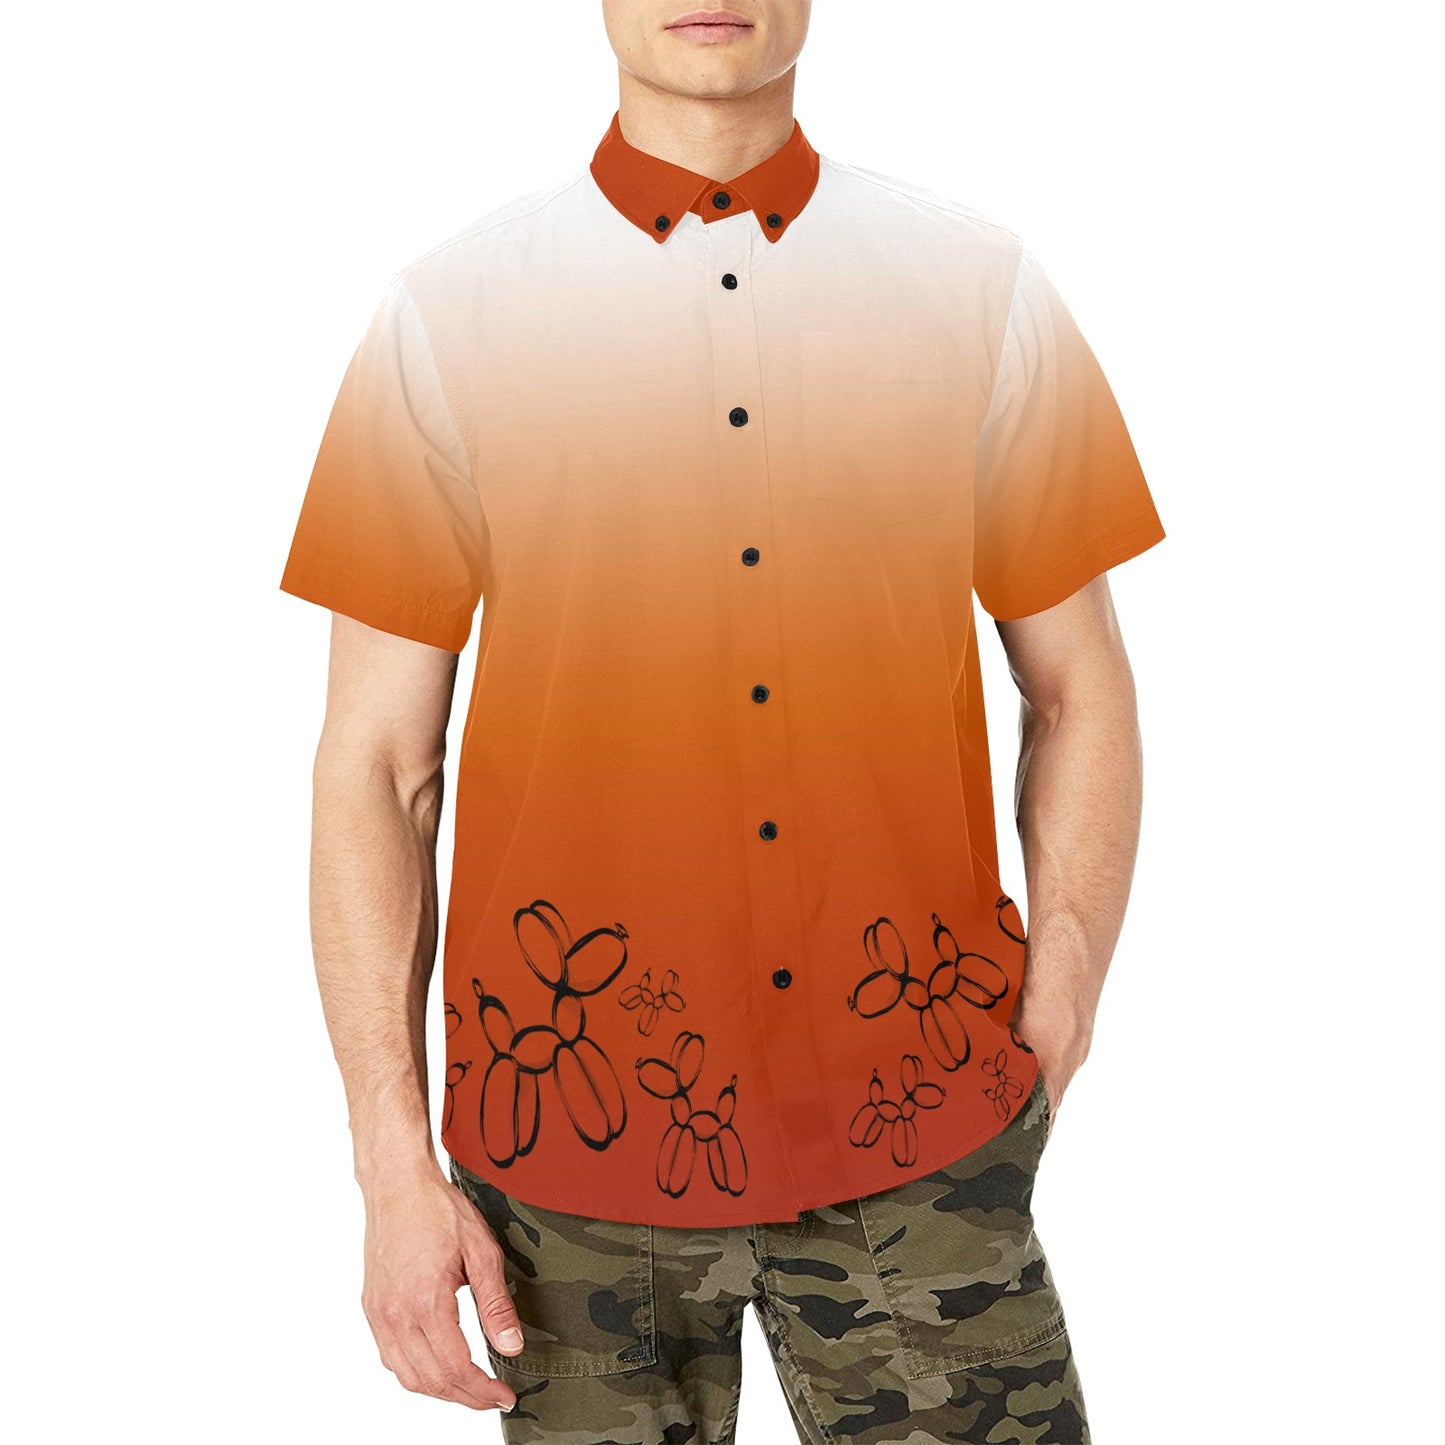 Balloon Twister shirt orange and white with balloon dogs